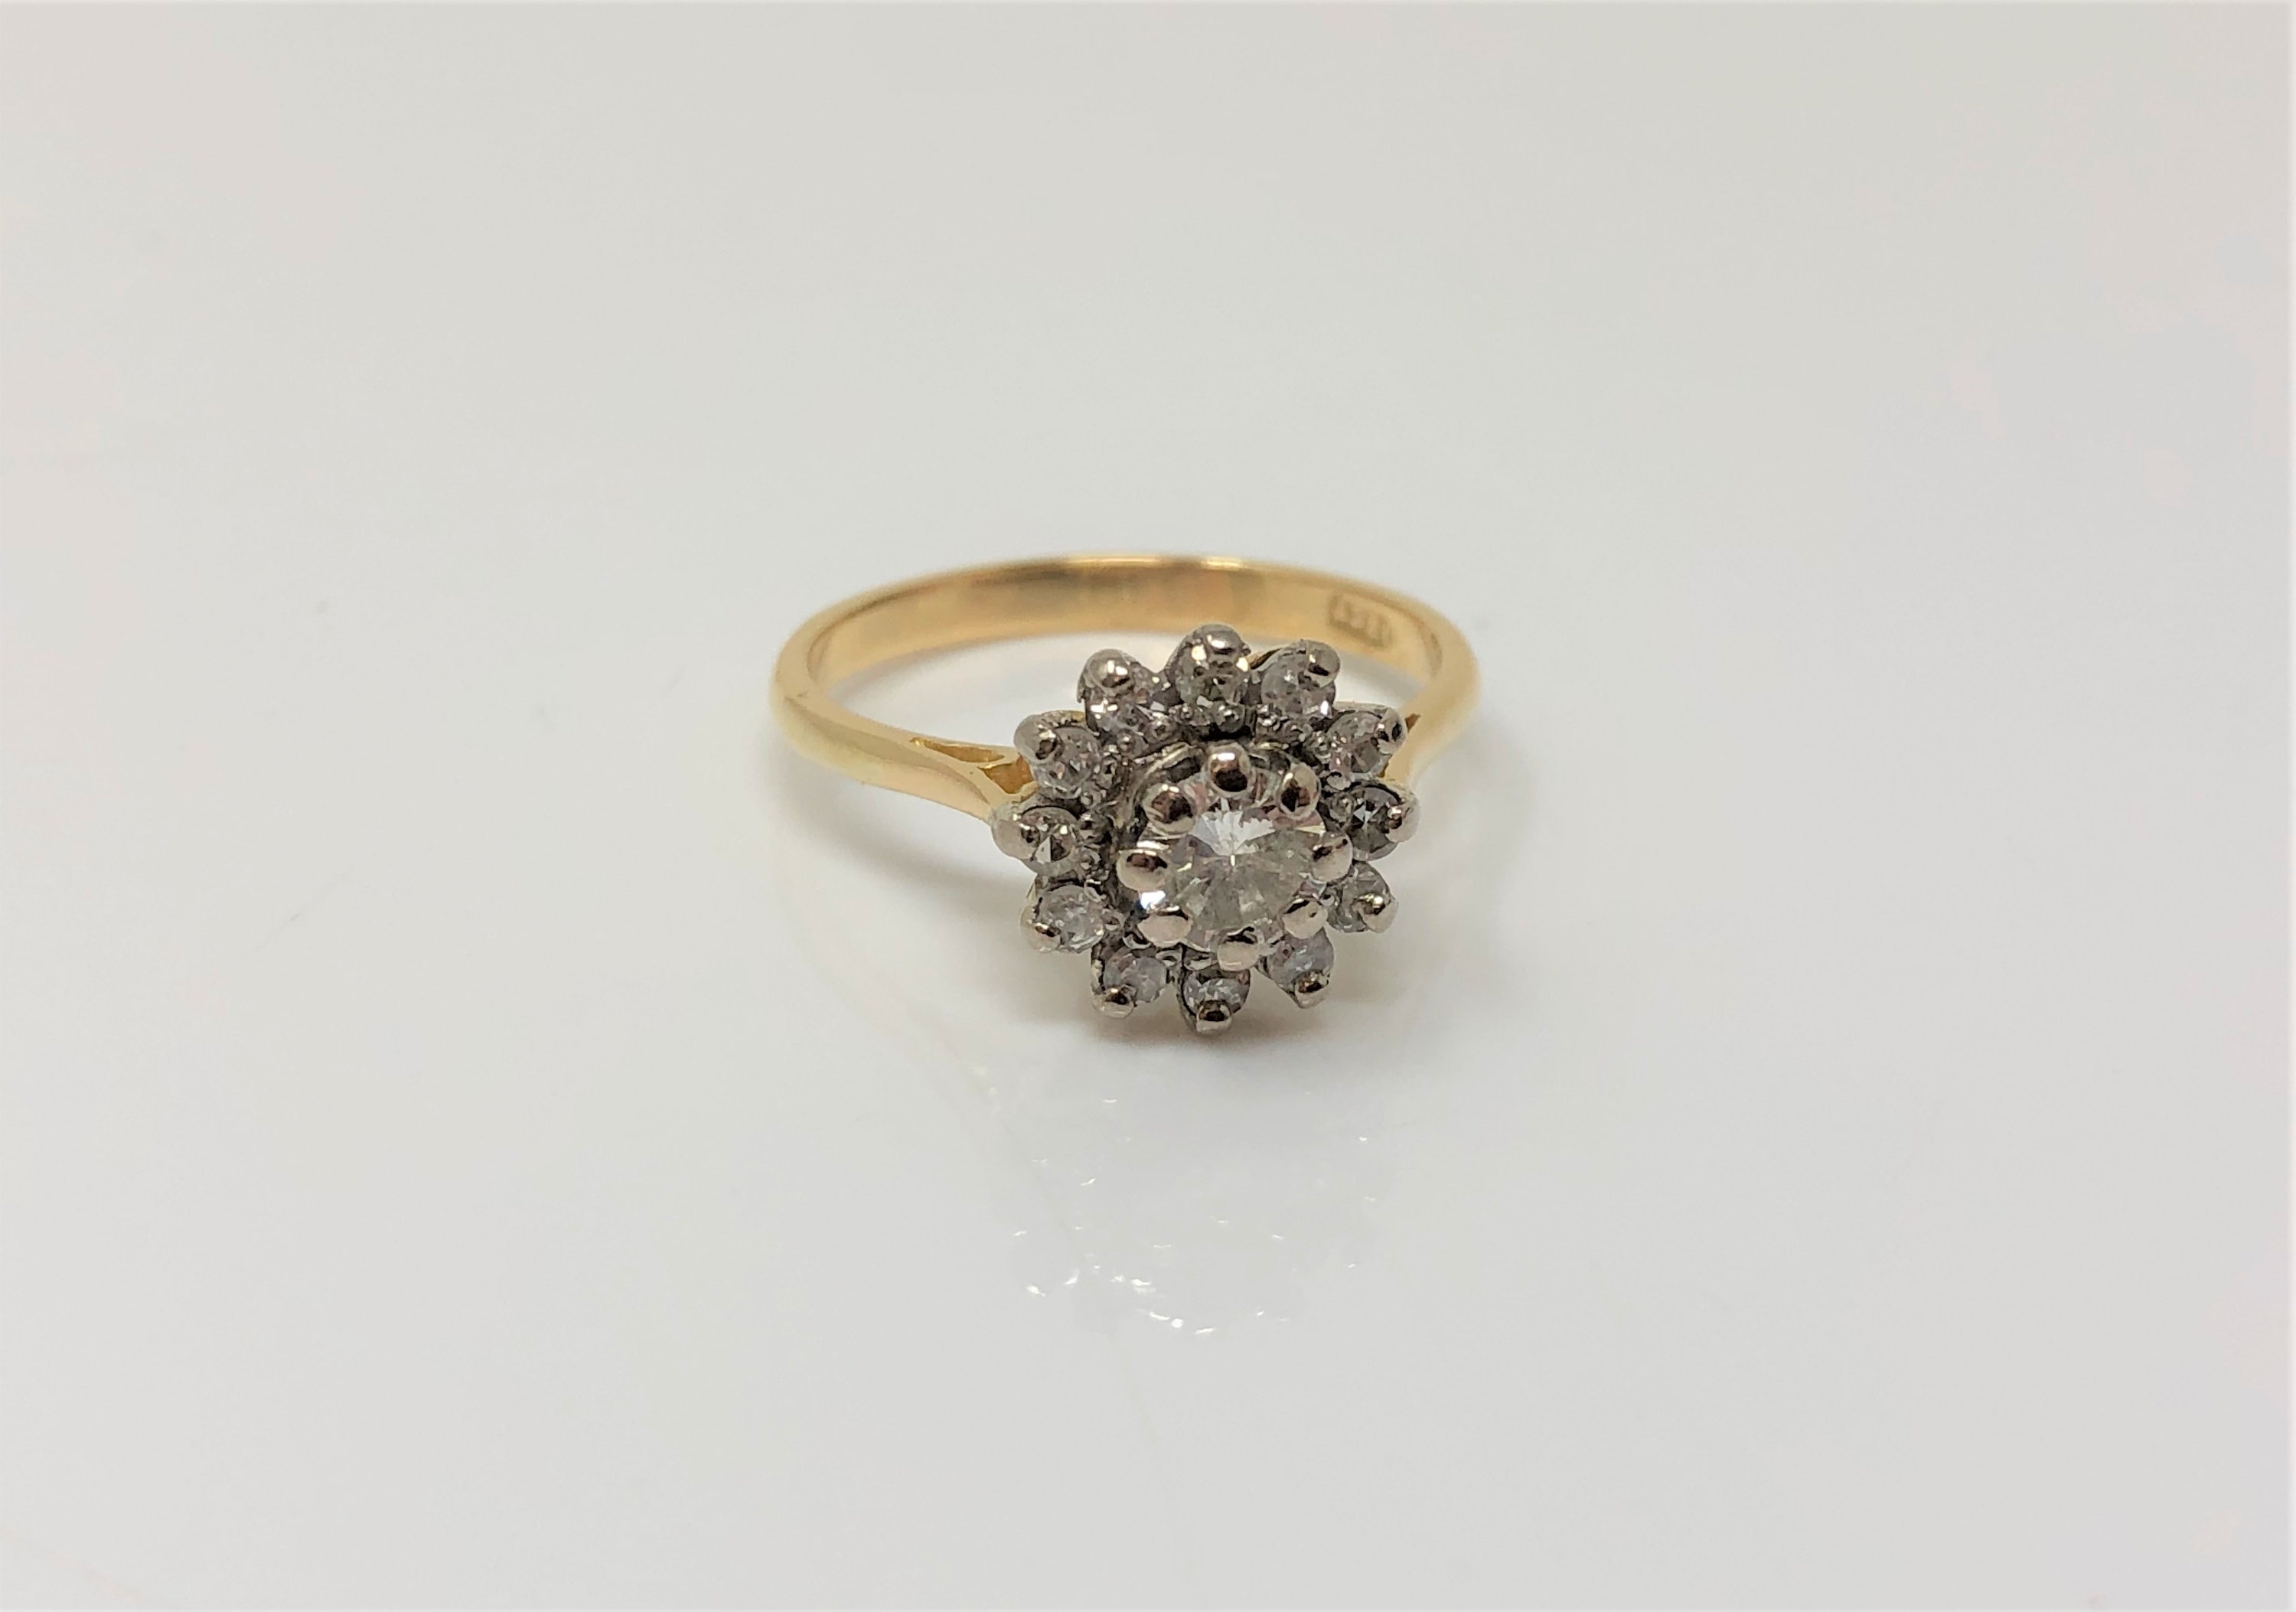 An 18ct gold diamond cluster ring, the central stone approx. 0.